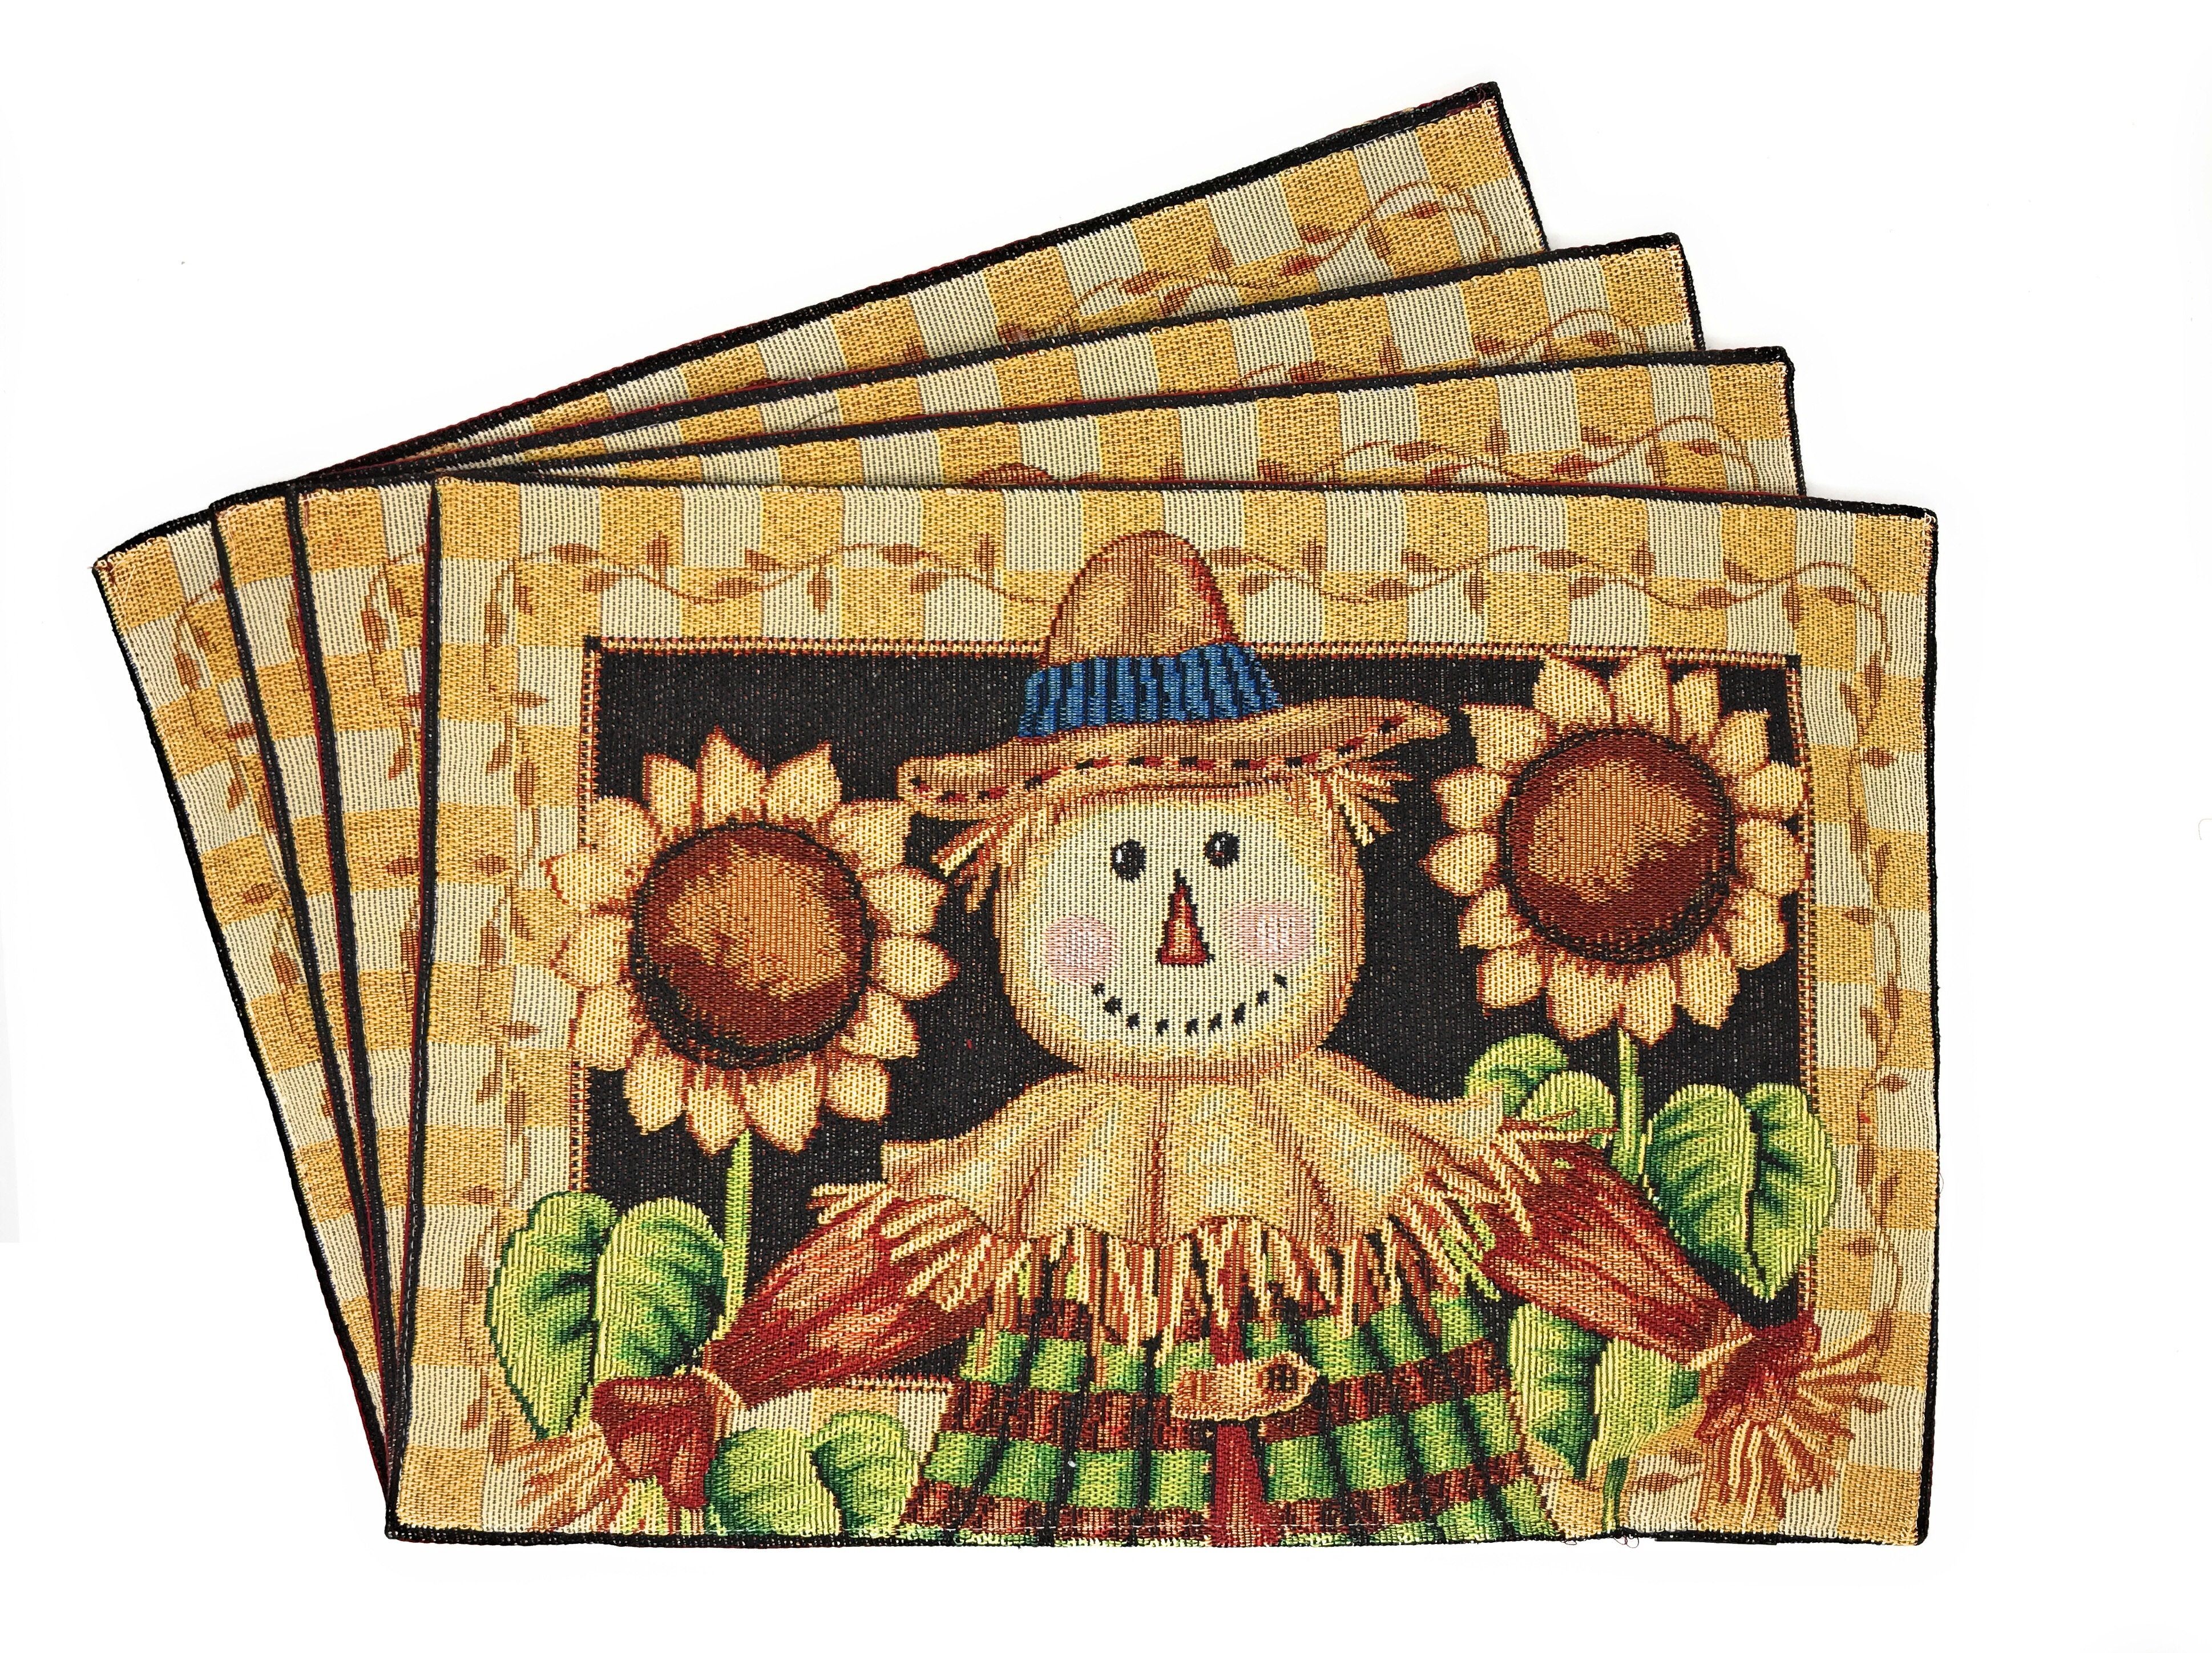 Tache Sunflower Field Scarecrow Autumn Harvest Woven Tapestry Placemat Set of 4 (11712PM) - Tache Home Fashion